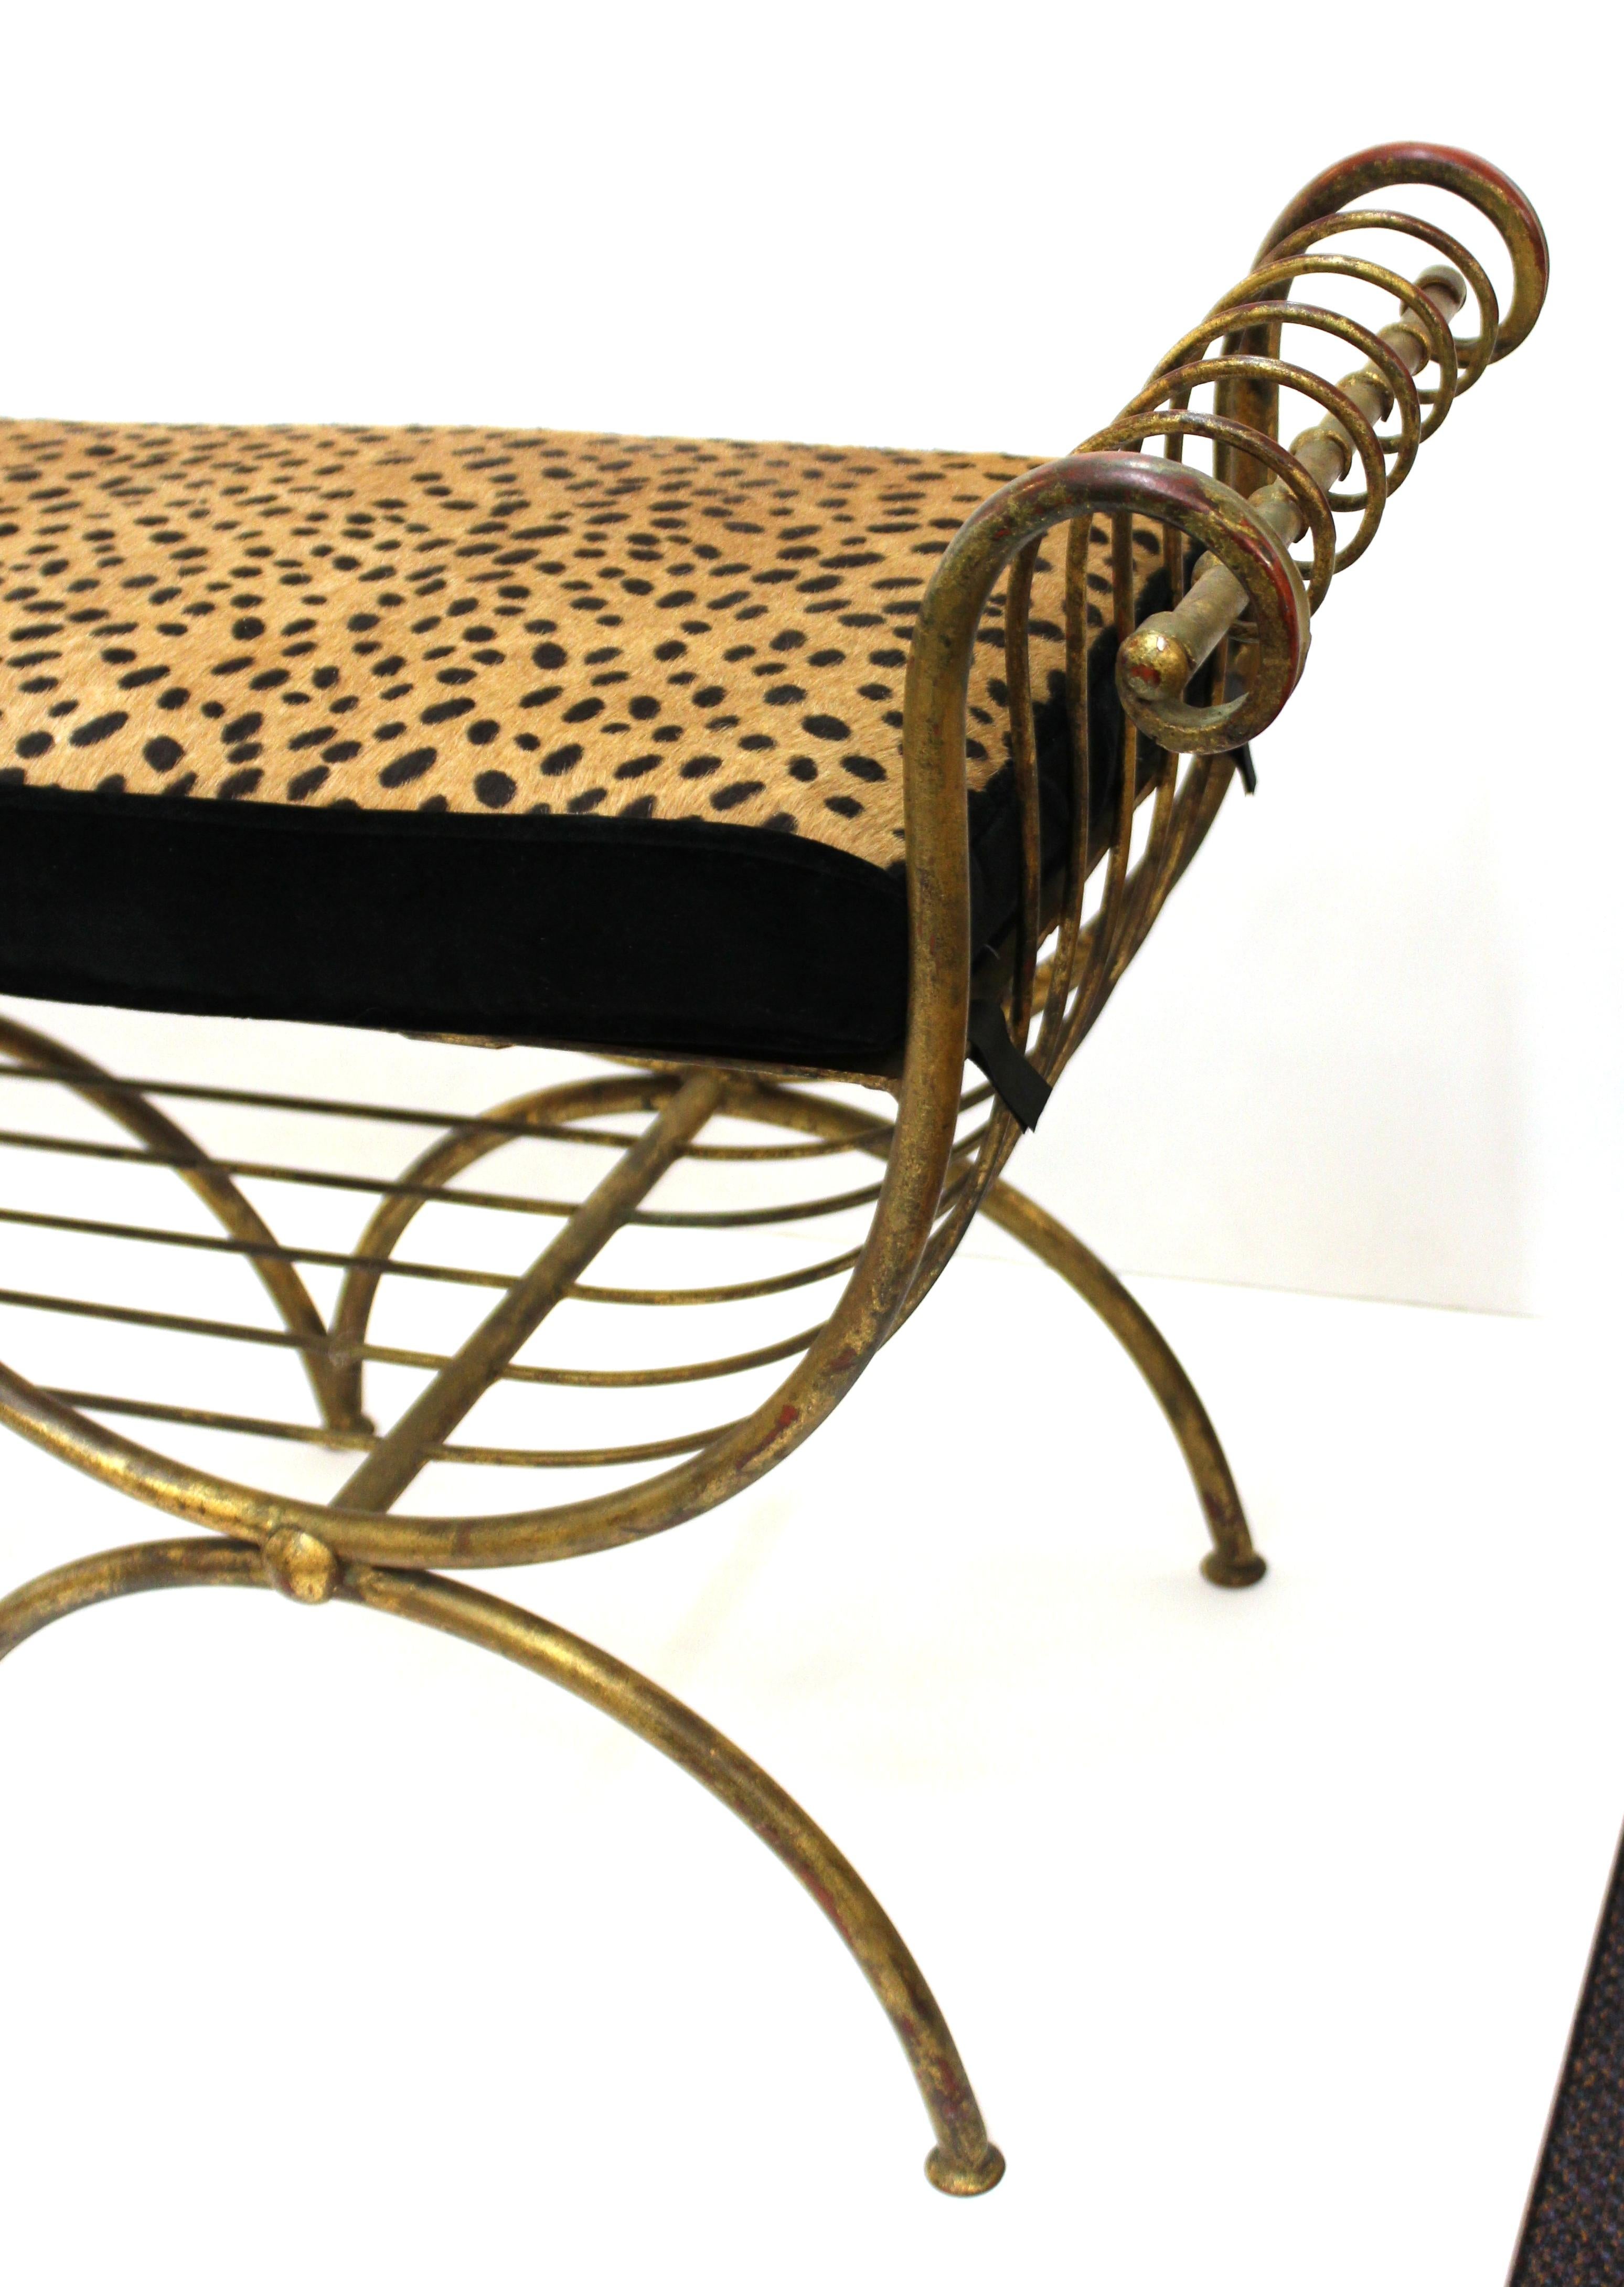 Italian Mid-Century Modern Bench in Gilt Iron with Faux Leopard Leather Seat 3